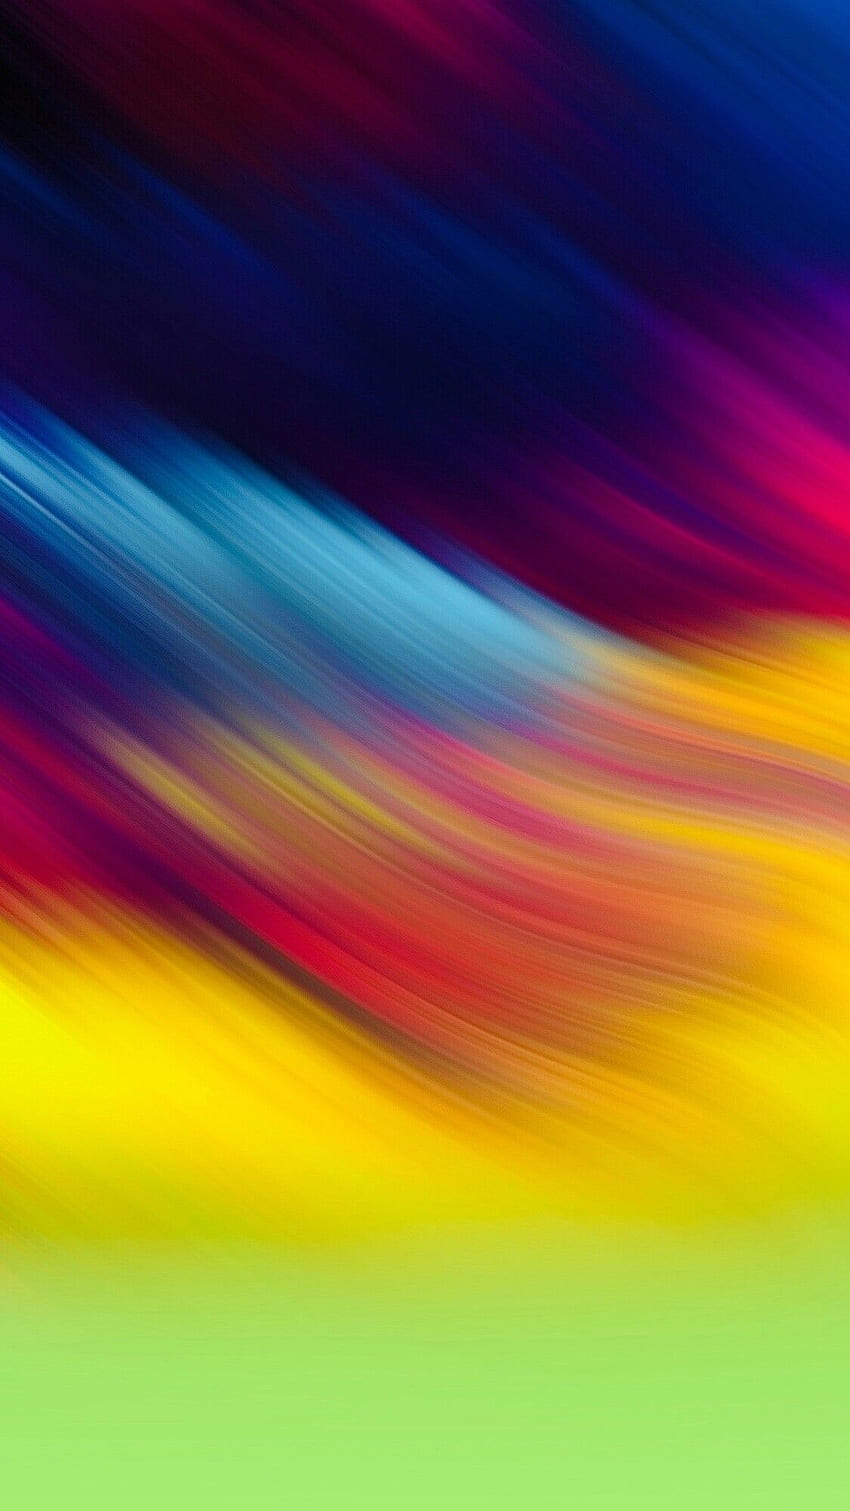 Joseph on Abstract °Amoled °Liquid °Gradient. Colorful , Abstract iphone , Rainbow, Multi Colored HD phone wallpaper